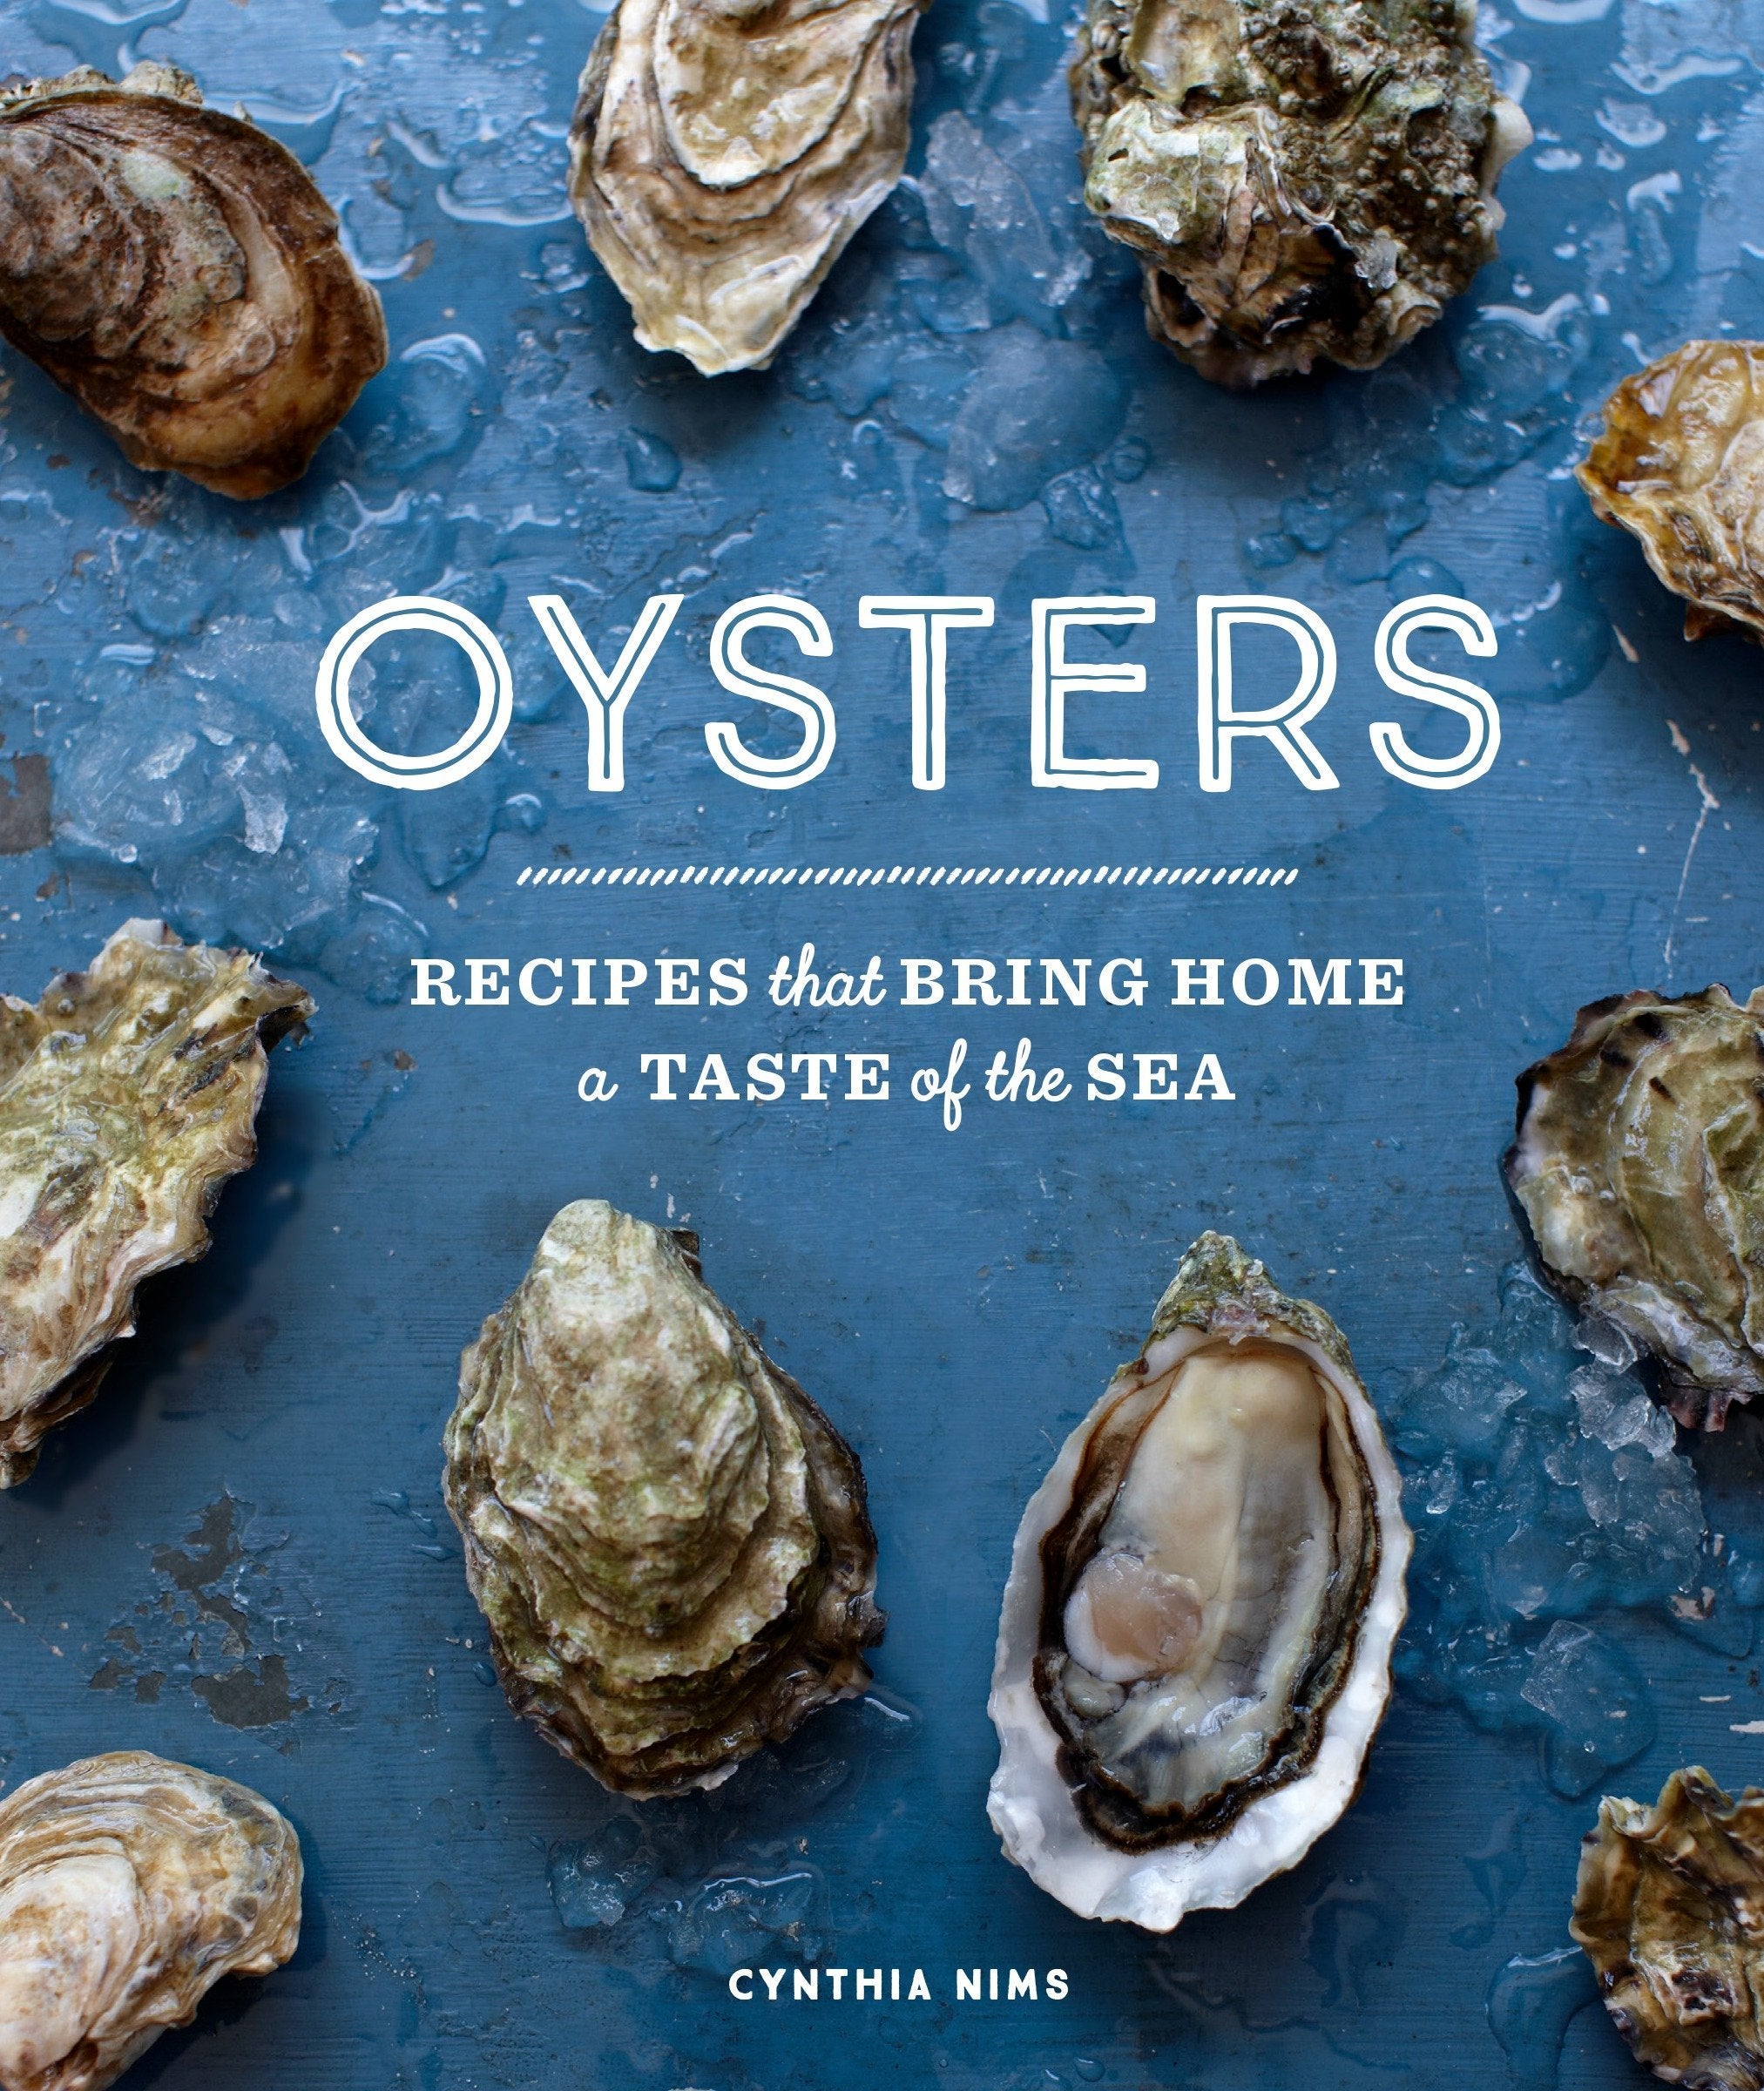 Oysters: Recipes that Bring Home a Taste of the Sea (Cynthia Nims)